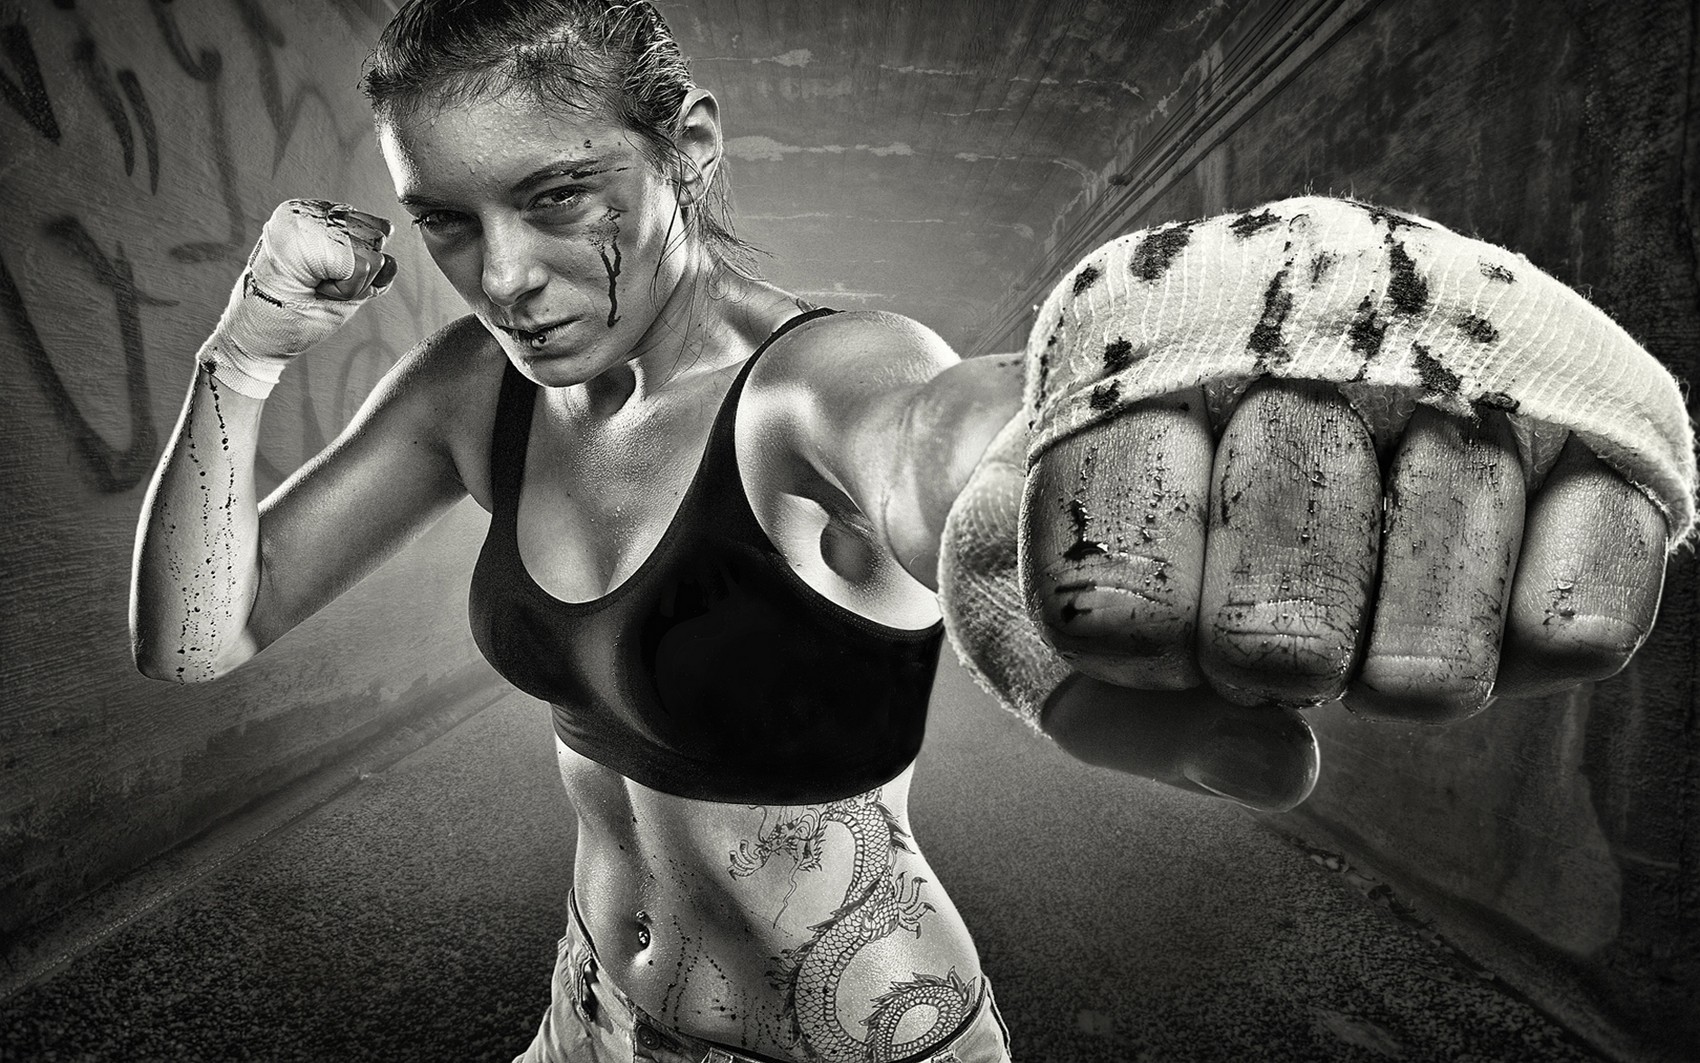 Wallpaper, women, model, urban, fists, boxing, fighting, bodybuilding, wounds, photograph, muscle, arm, black and white, monochrome photography, photo shoot 1700x1063